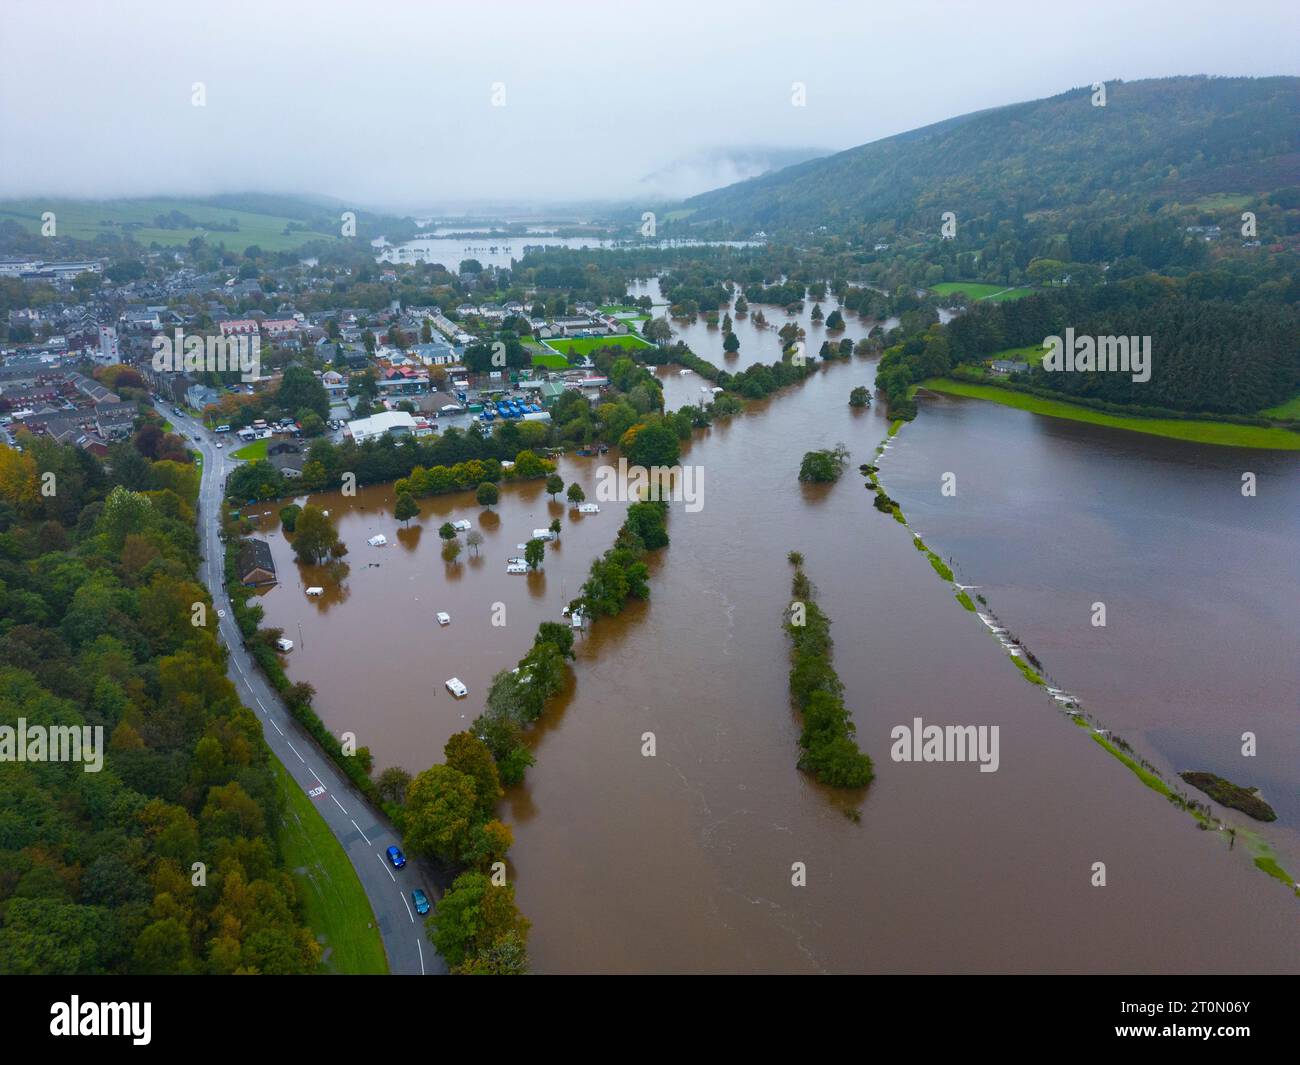 https://c8.alamy.com/comp/2T0N06Y/aberfeldy-scotland-uk-8th-oct-2023-views-of-aberfeldy-caravan-park-which-has-been-flooded-when-the-adjacent-river-tay-broke-its-banks-after-prolonged-heavy-rainfall-several-caravan-owners-have-not-been-able-to-remove-their-property-which-is-now-submerged-under-several-feet-of-water-pic-aerial-view-of-the-flooded-campsite-credit-iain-mastertonalamy-live-news-2T0N06Y.jpg